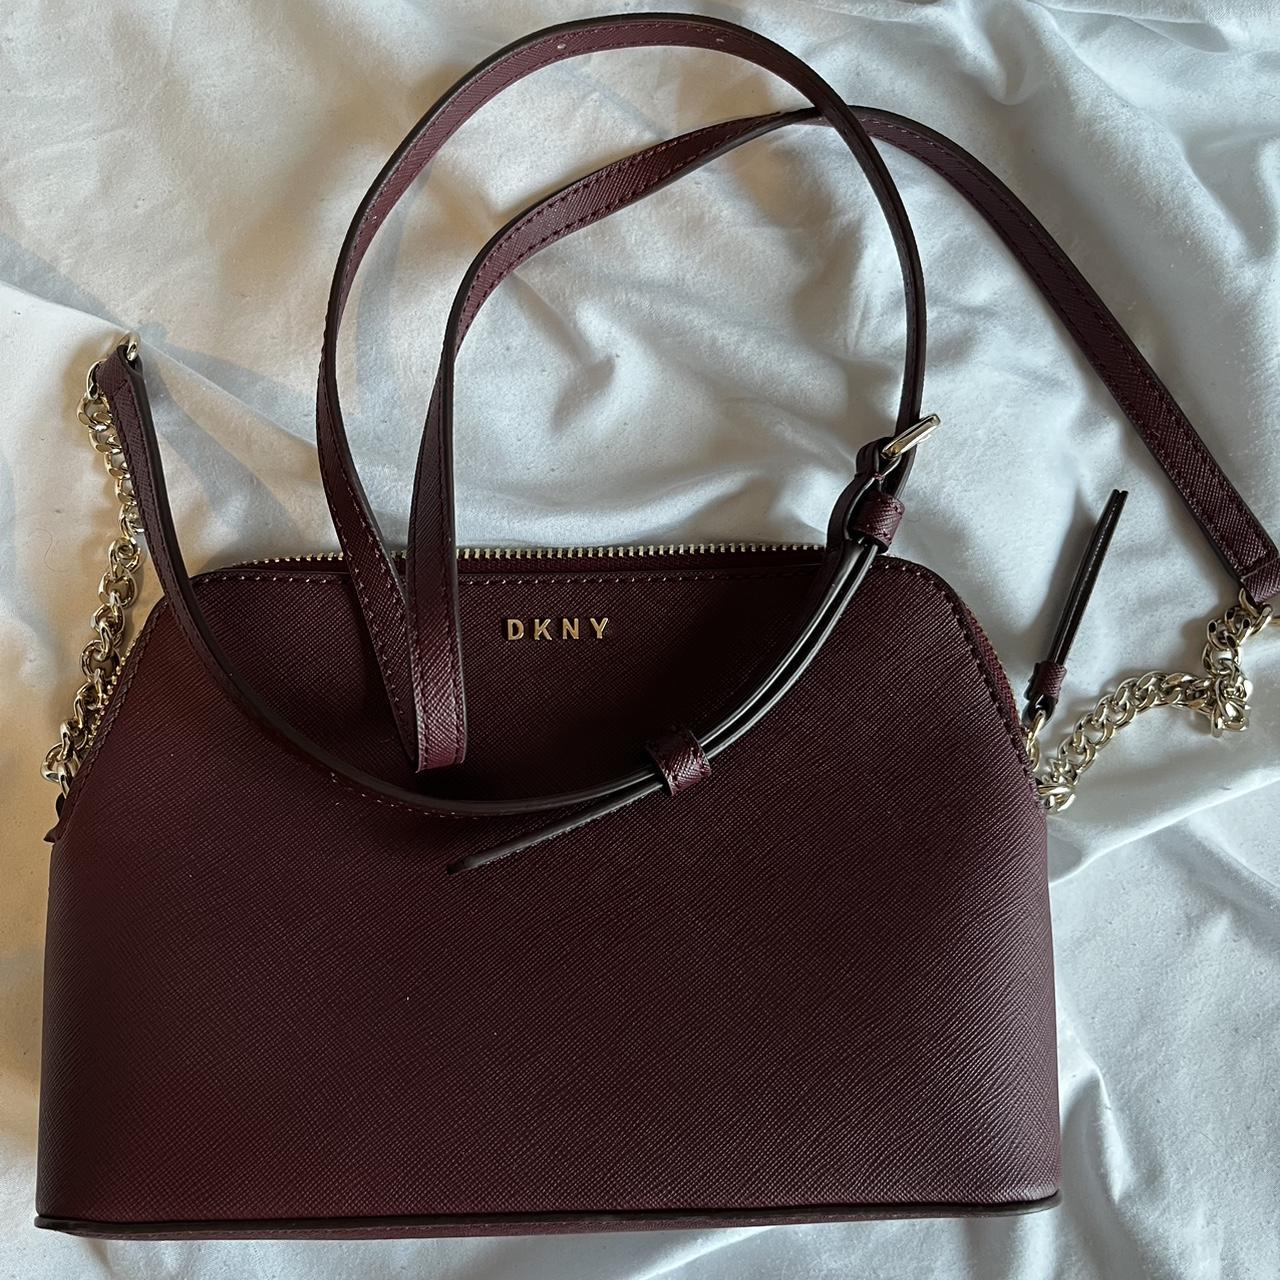 DKNY Women's Burgundy and Gold Bag